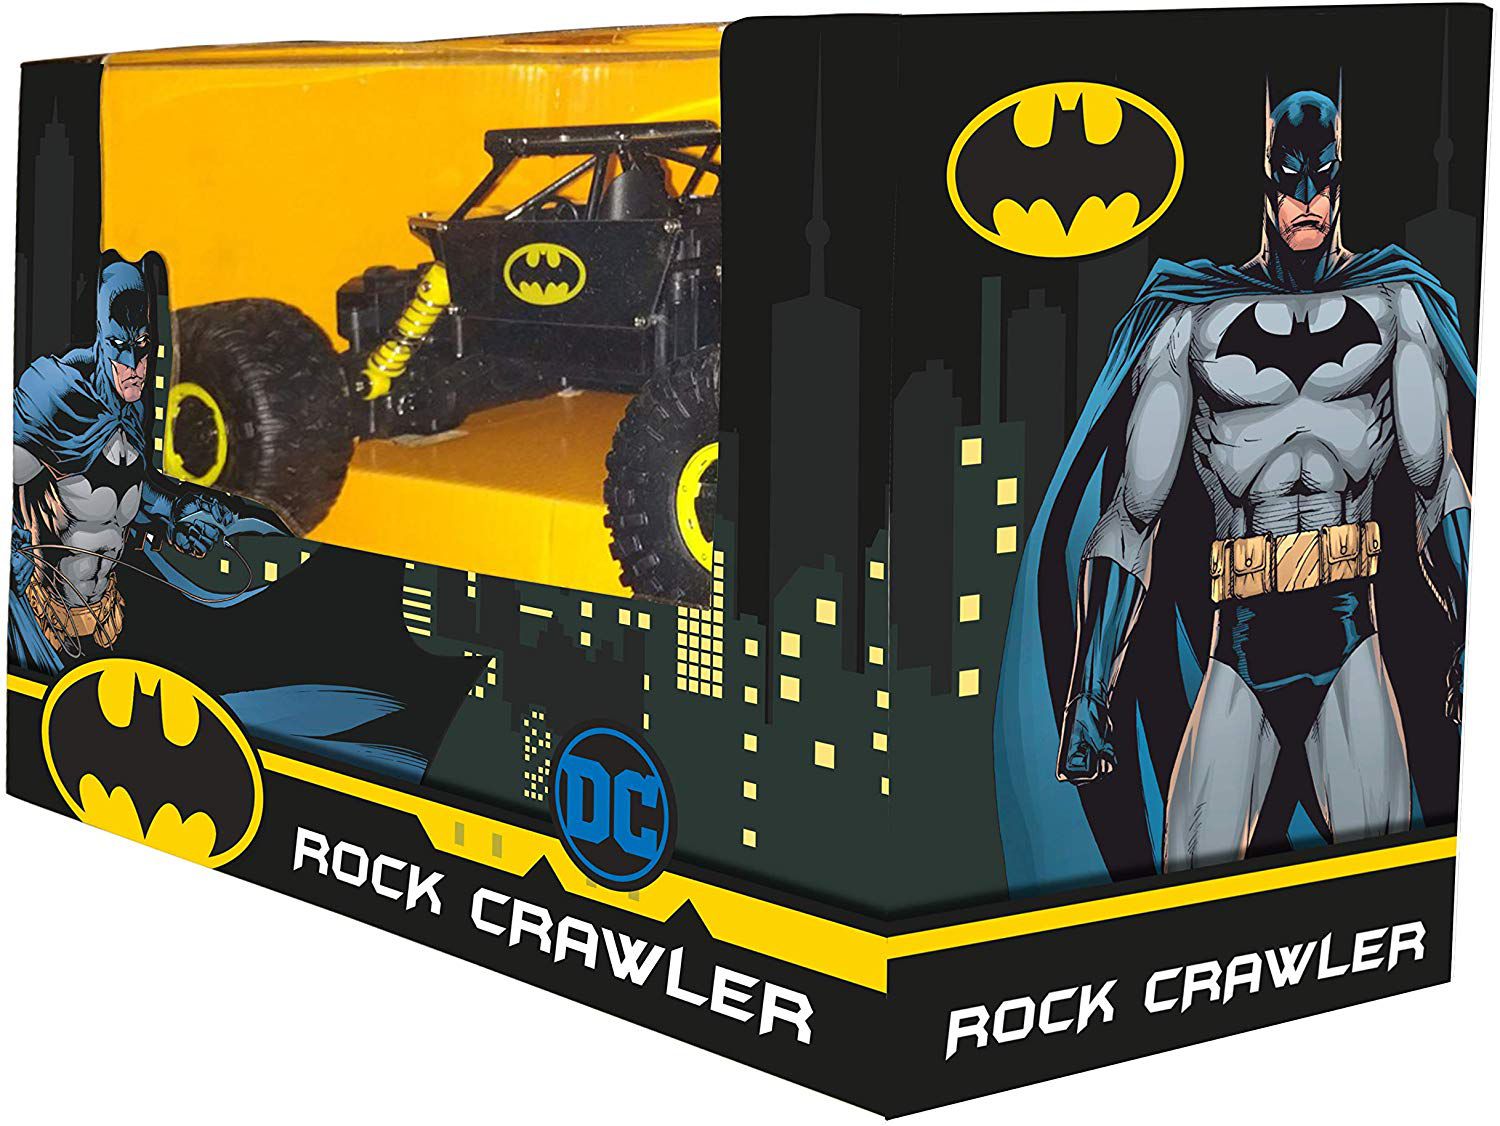 Batman Remote Control Rock Crawler Monster Truck - Buy Batman Remote Control  Rock Crawler Monster Truck Online at Low Price - Snapdeal